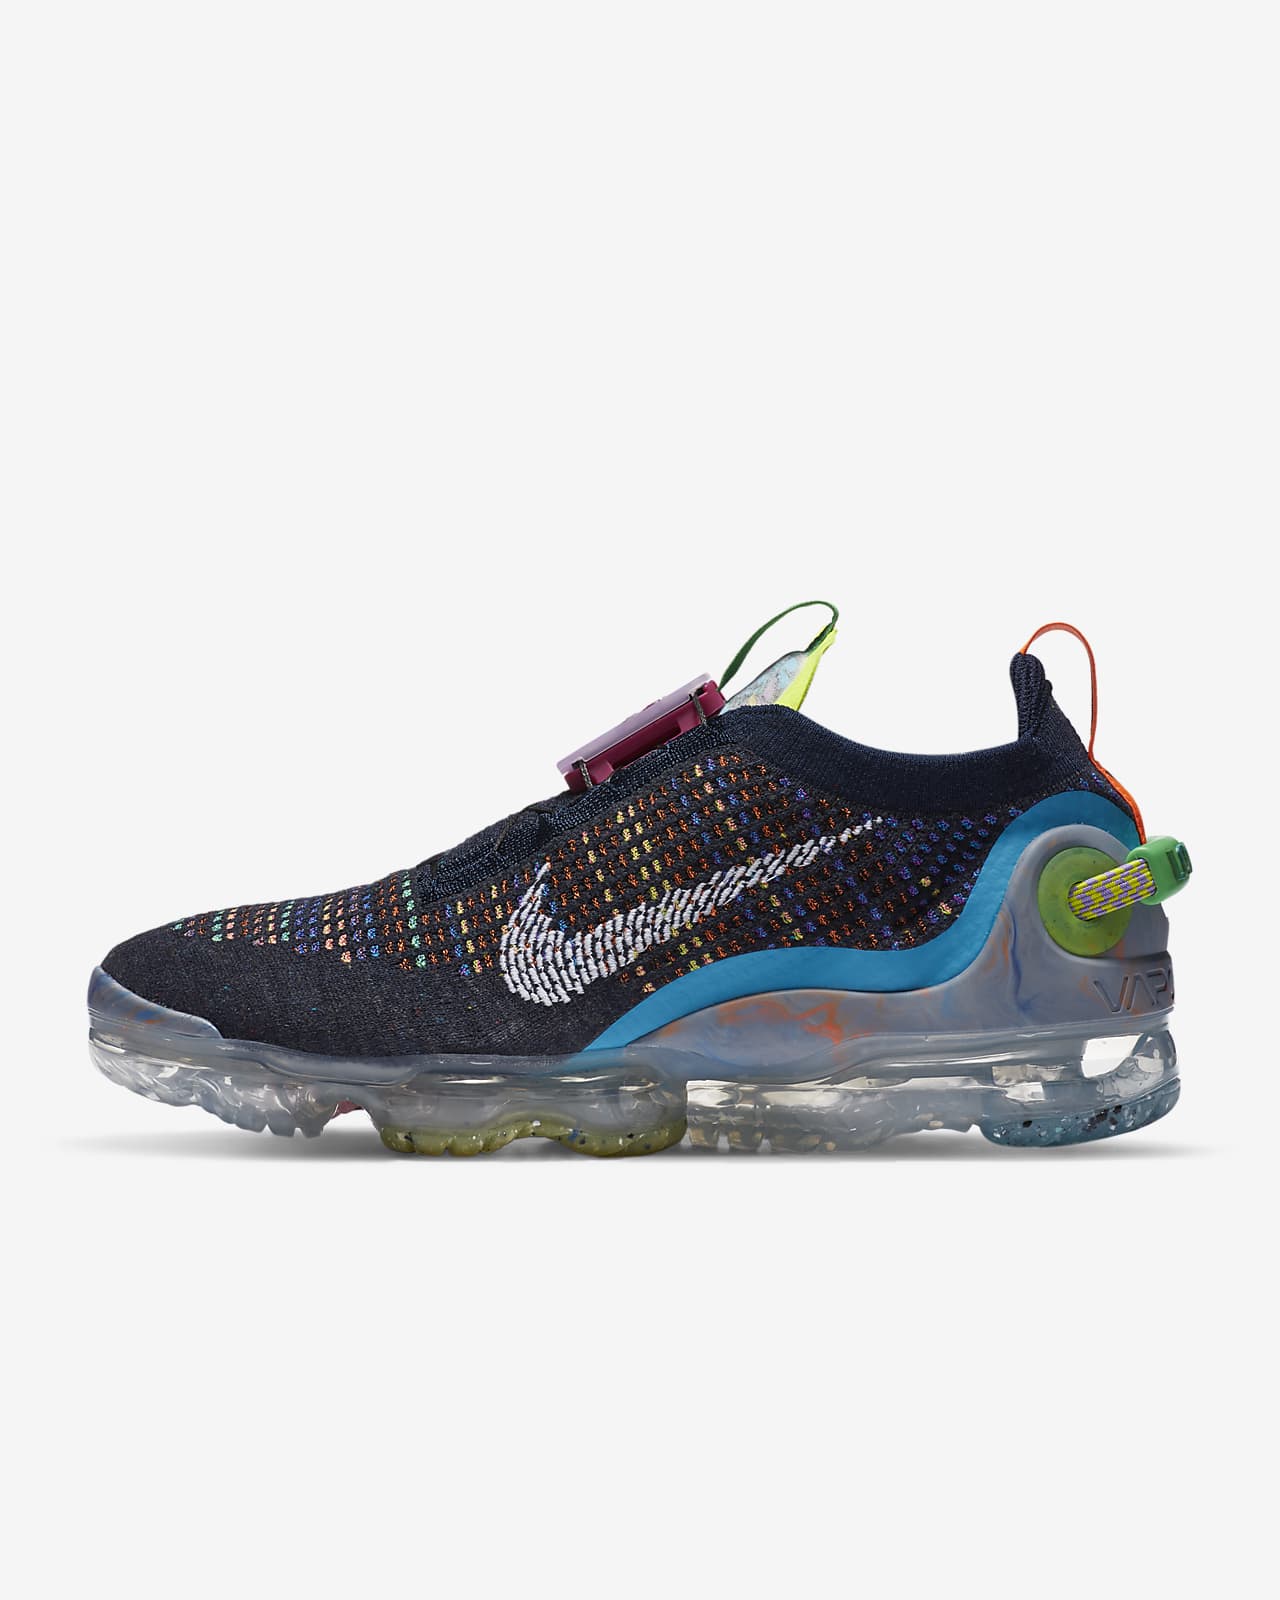 nike vapormax new release 2020